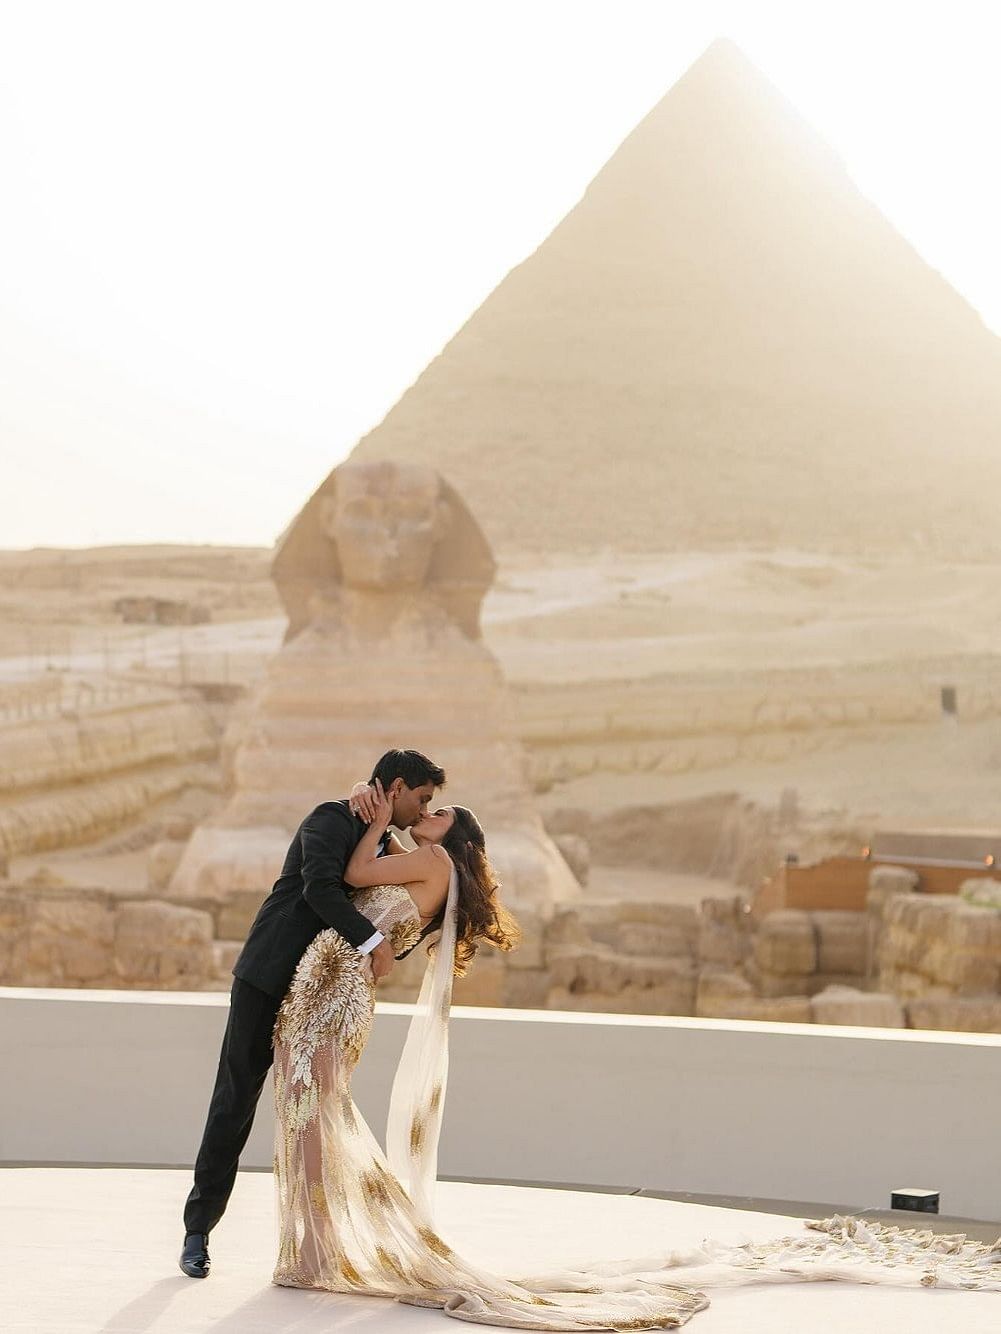 The powerful couple got married in front of the Great Pyramids in Egypt on April 26.